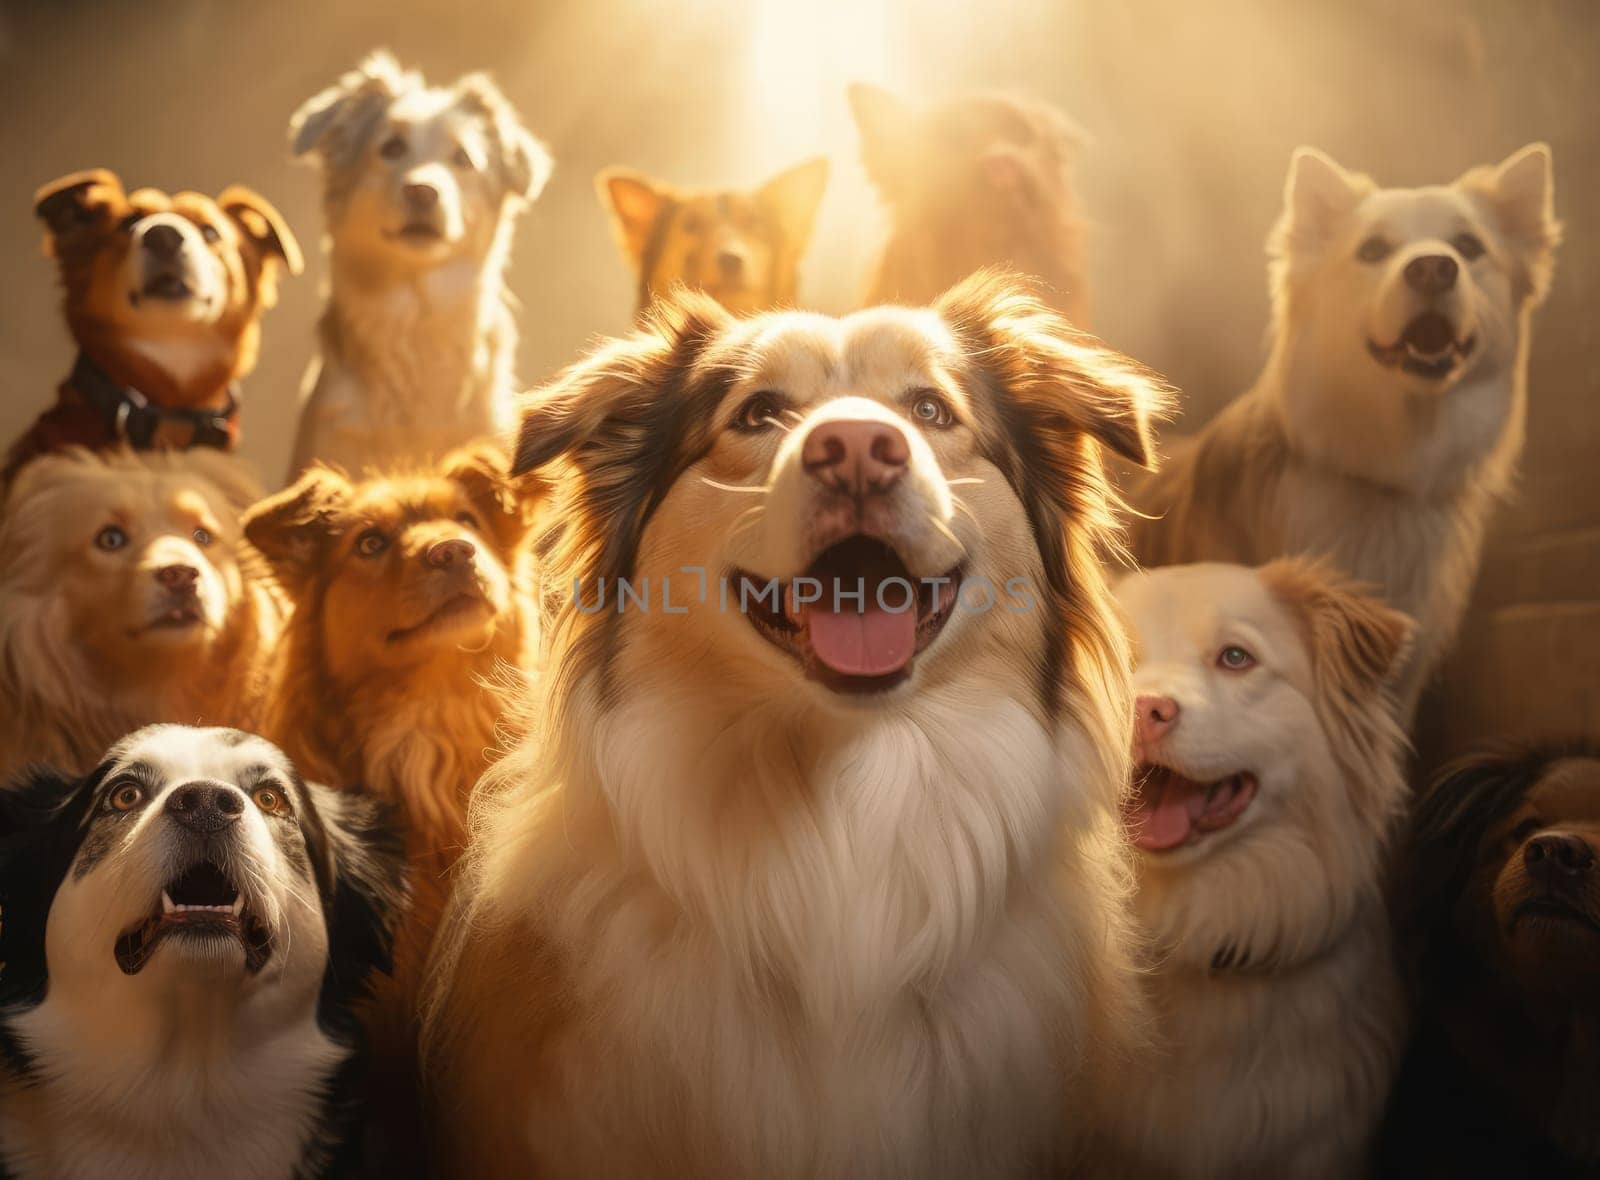 Several dogs take a group selfie. Everyone is looking at the camera